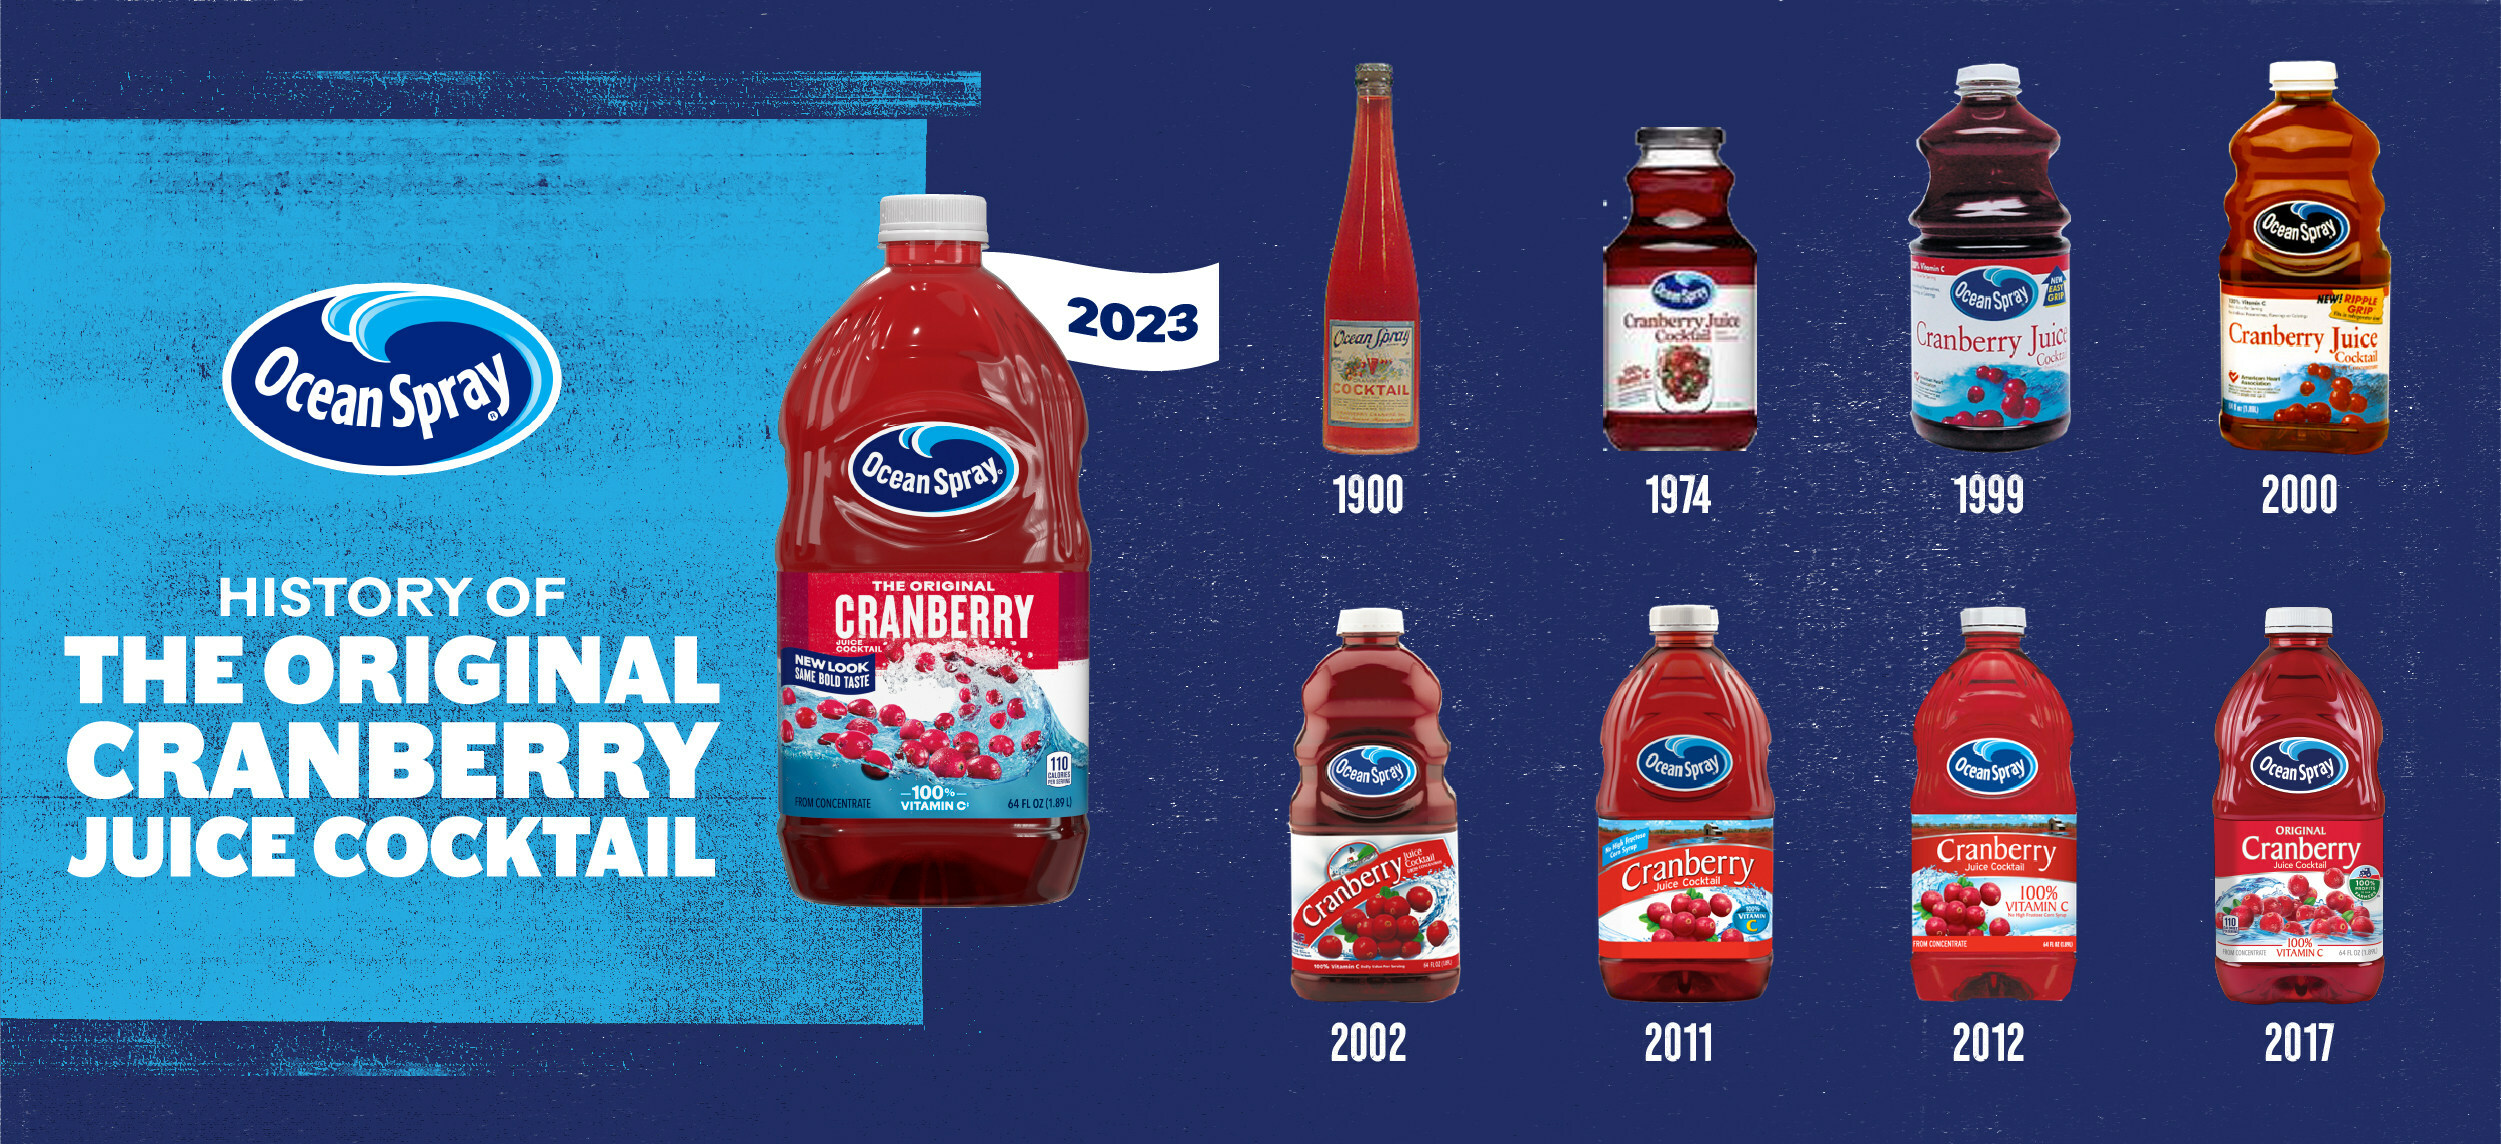 Ocean Spray Gets a Spiffy New Refresh for the First Time in Over 20 Years